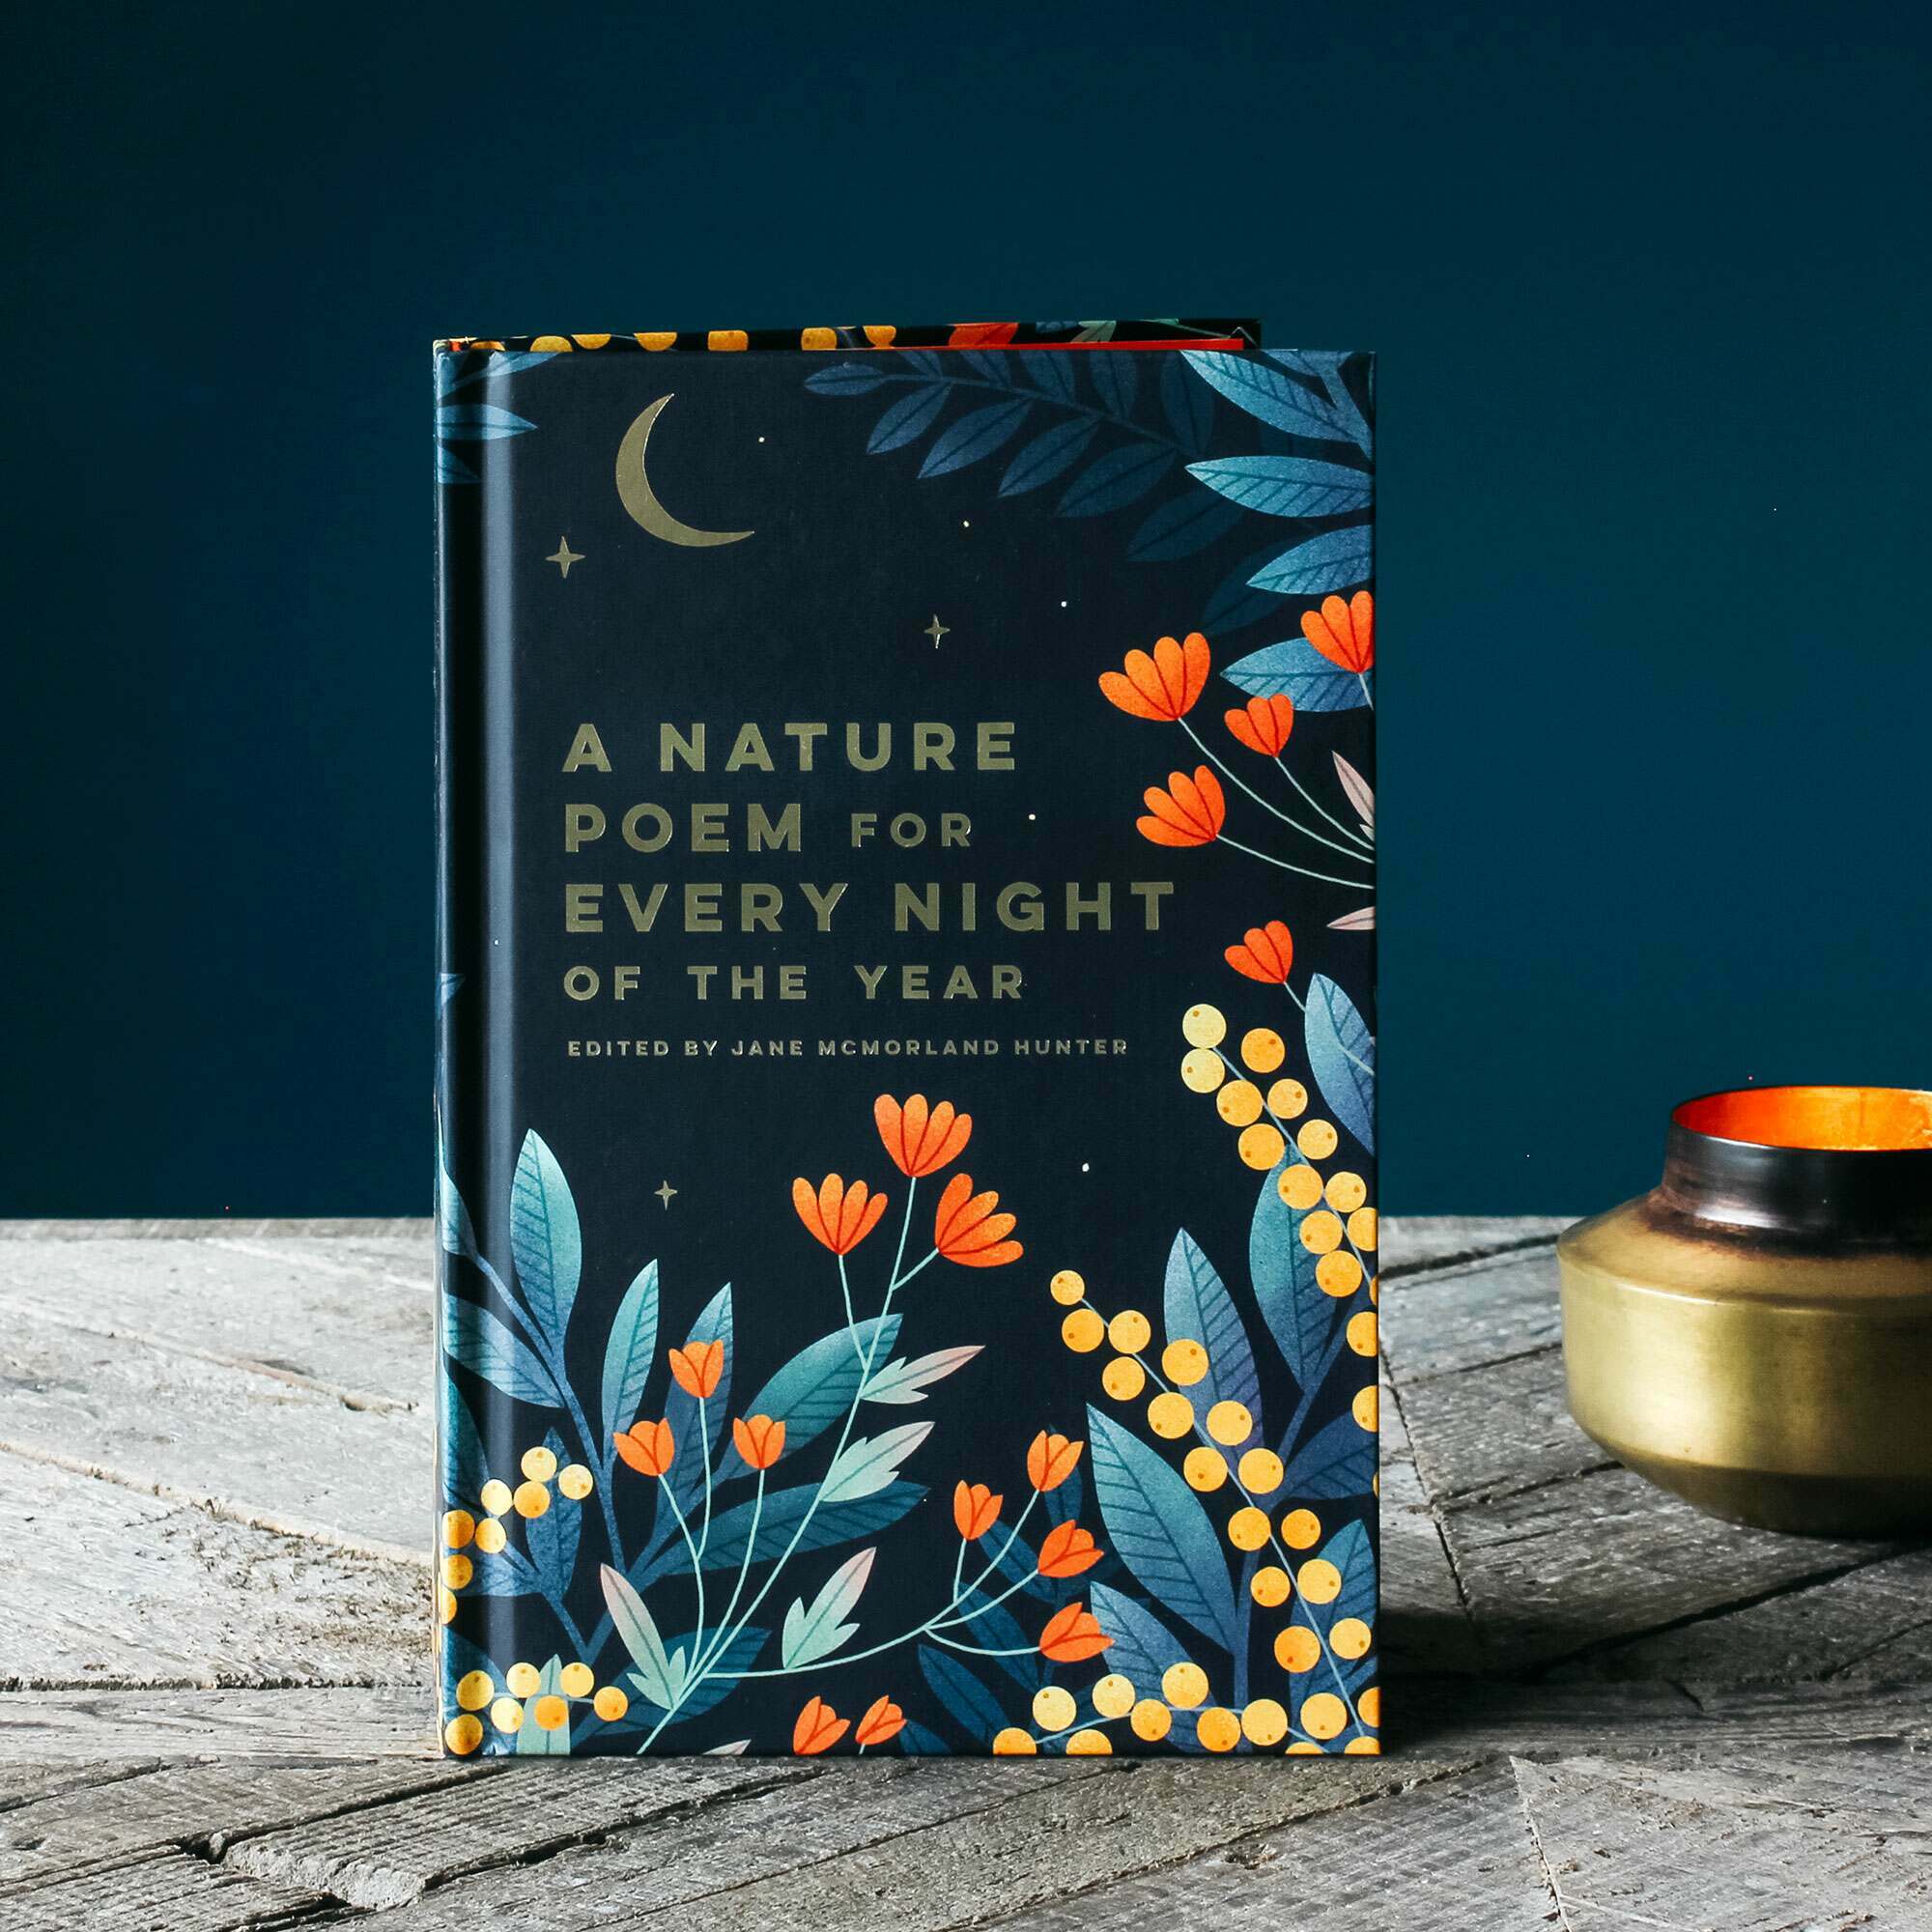 Photo of Graham and green a nature poem for every night book